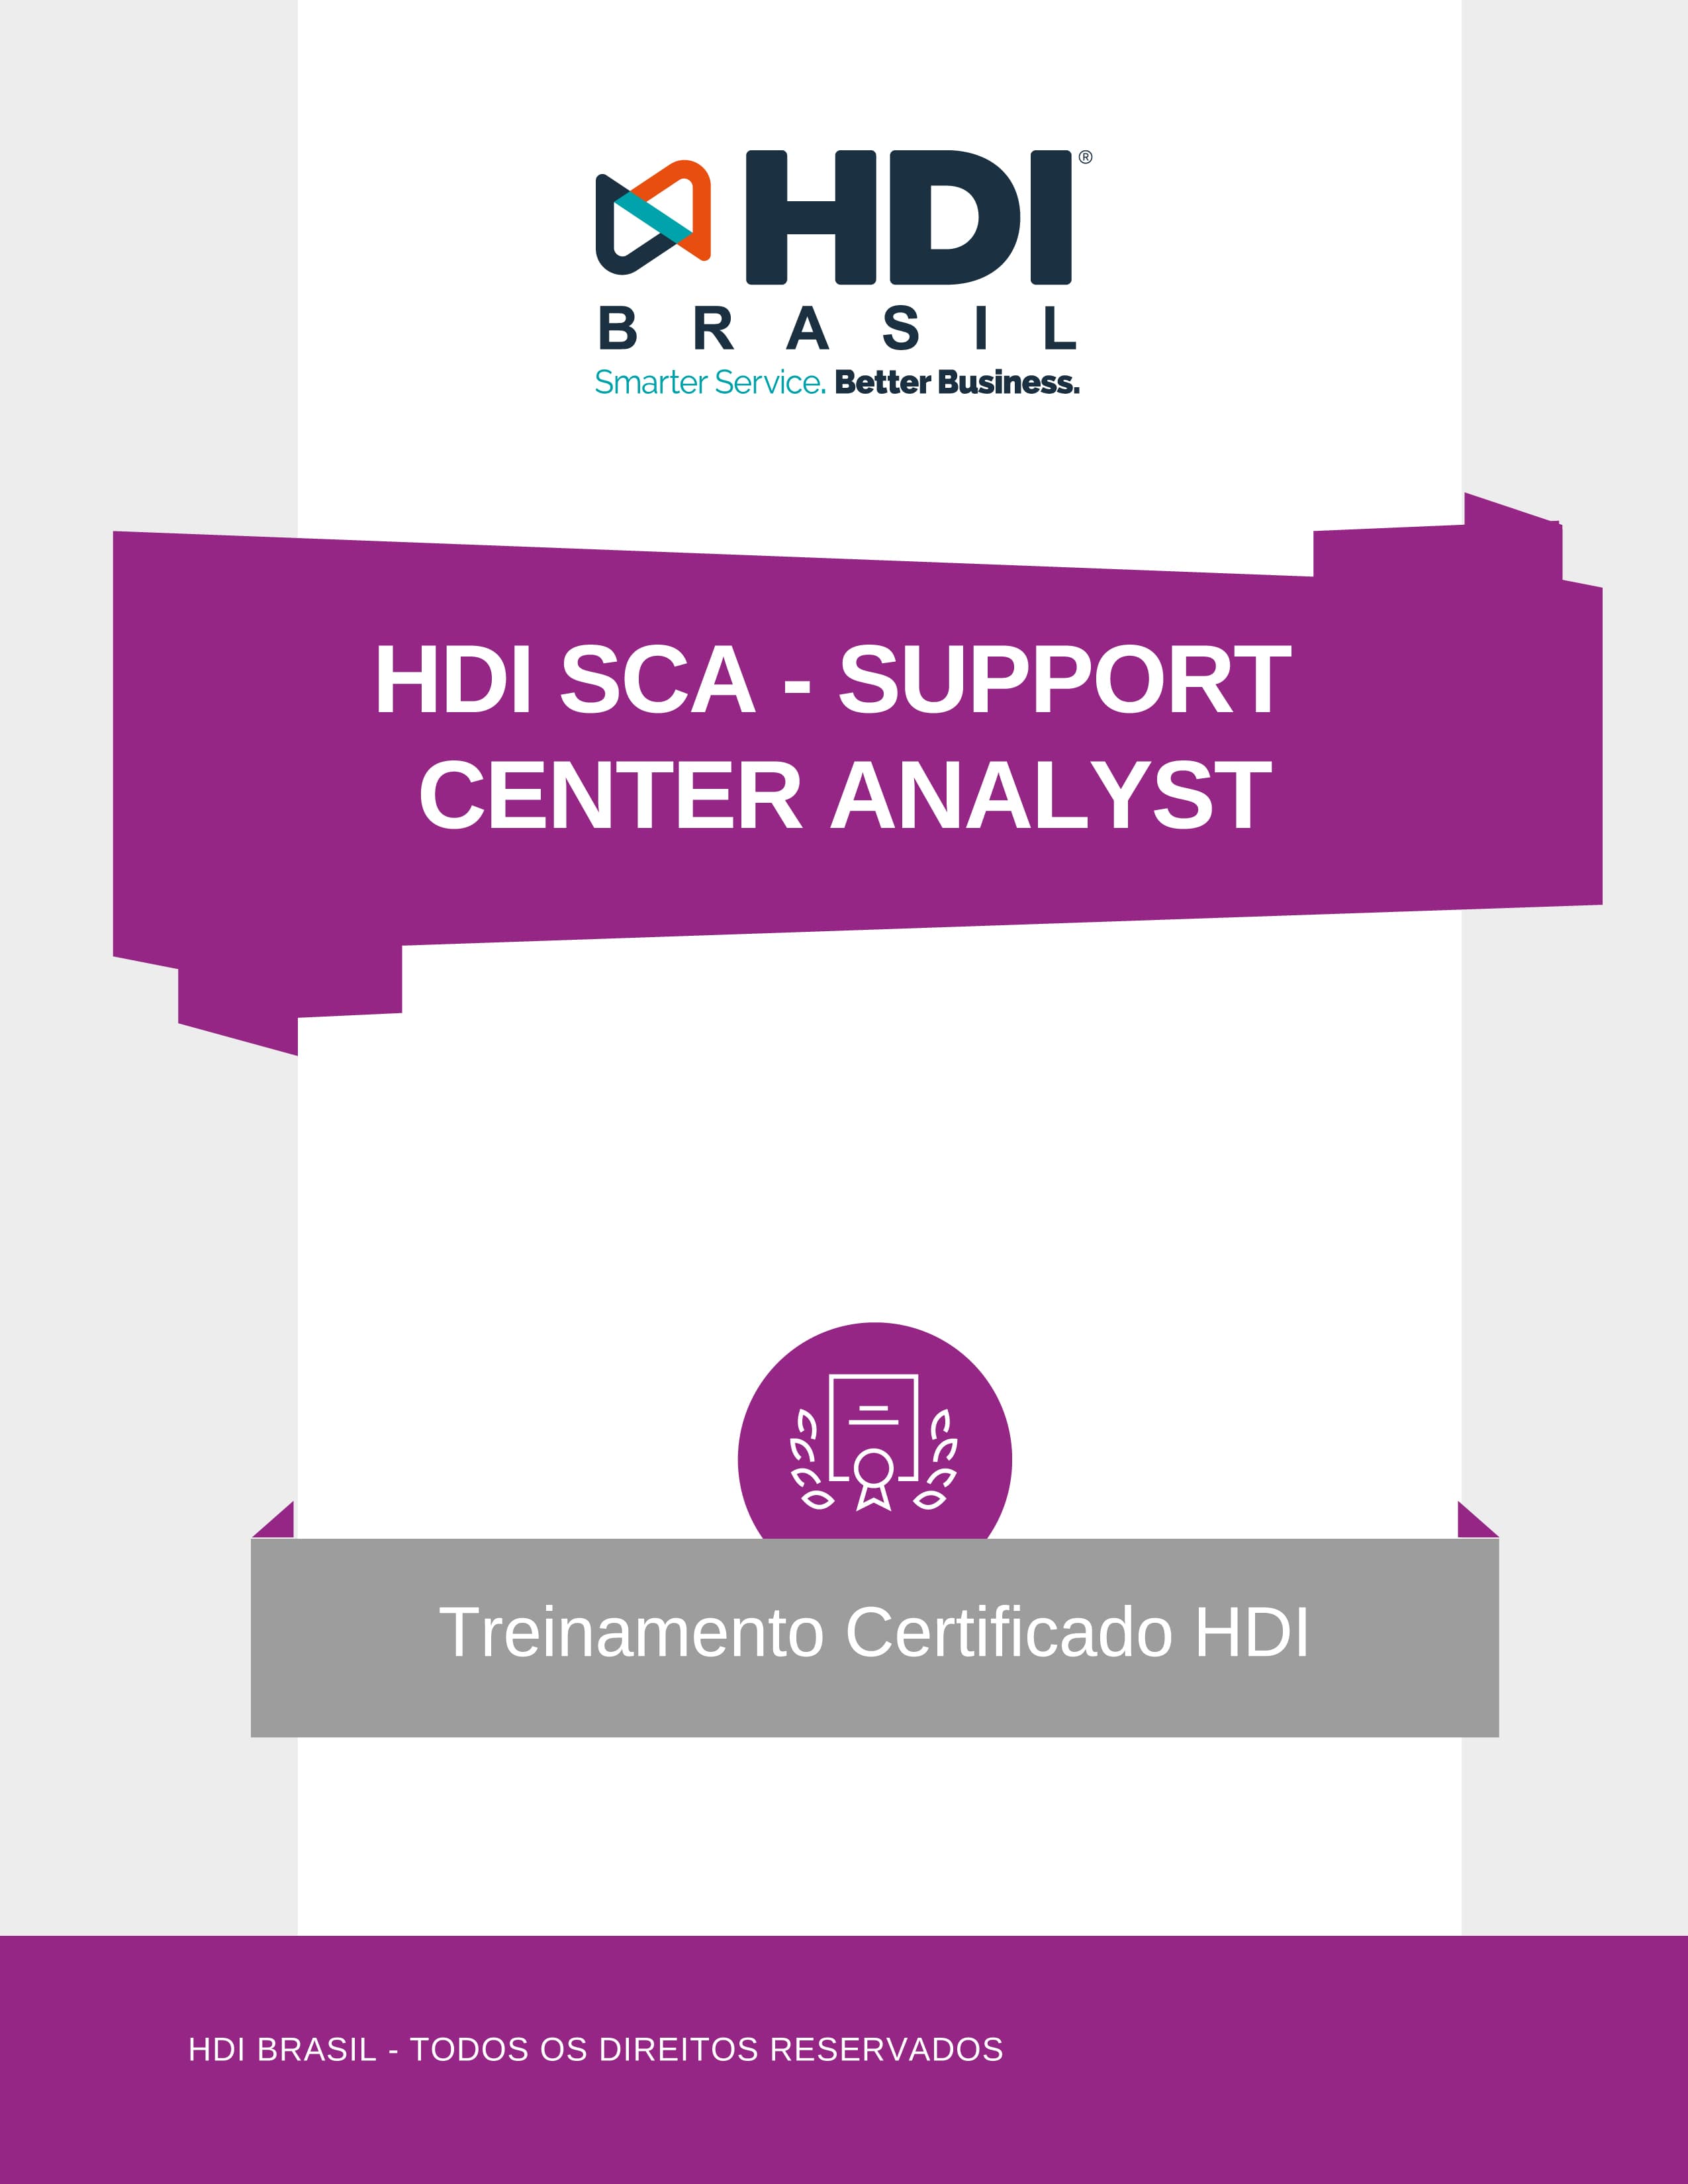 HDI SCA - SUPPORT CENTER ANALYST